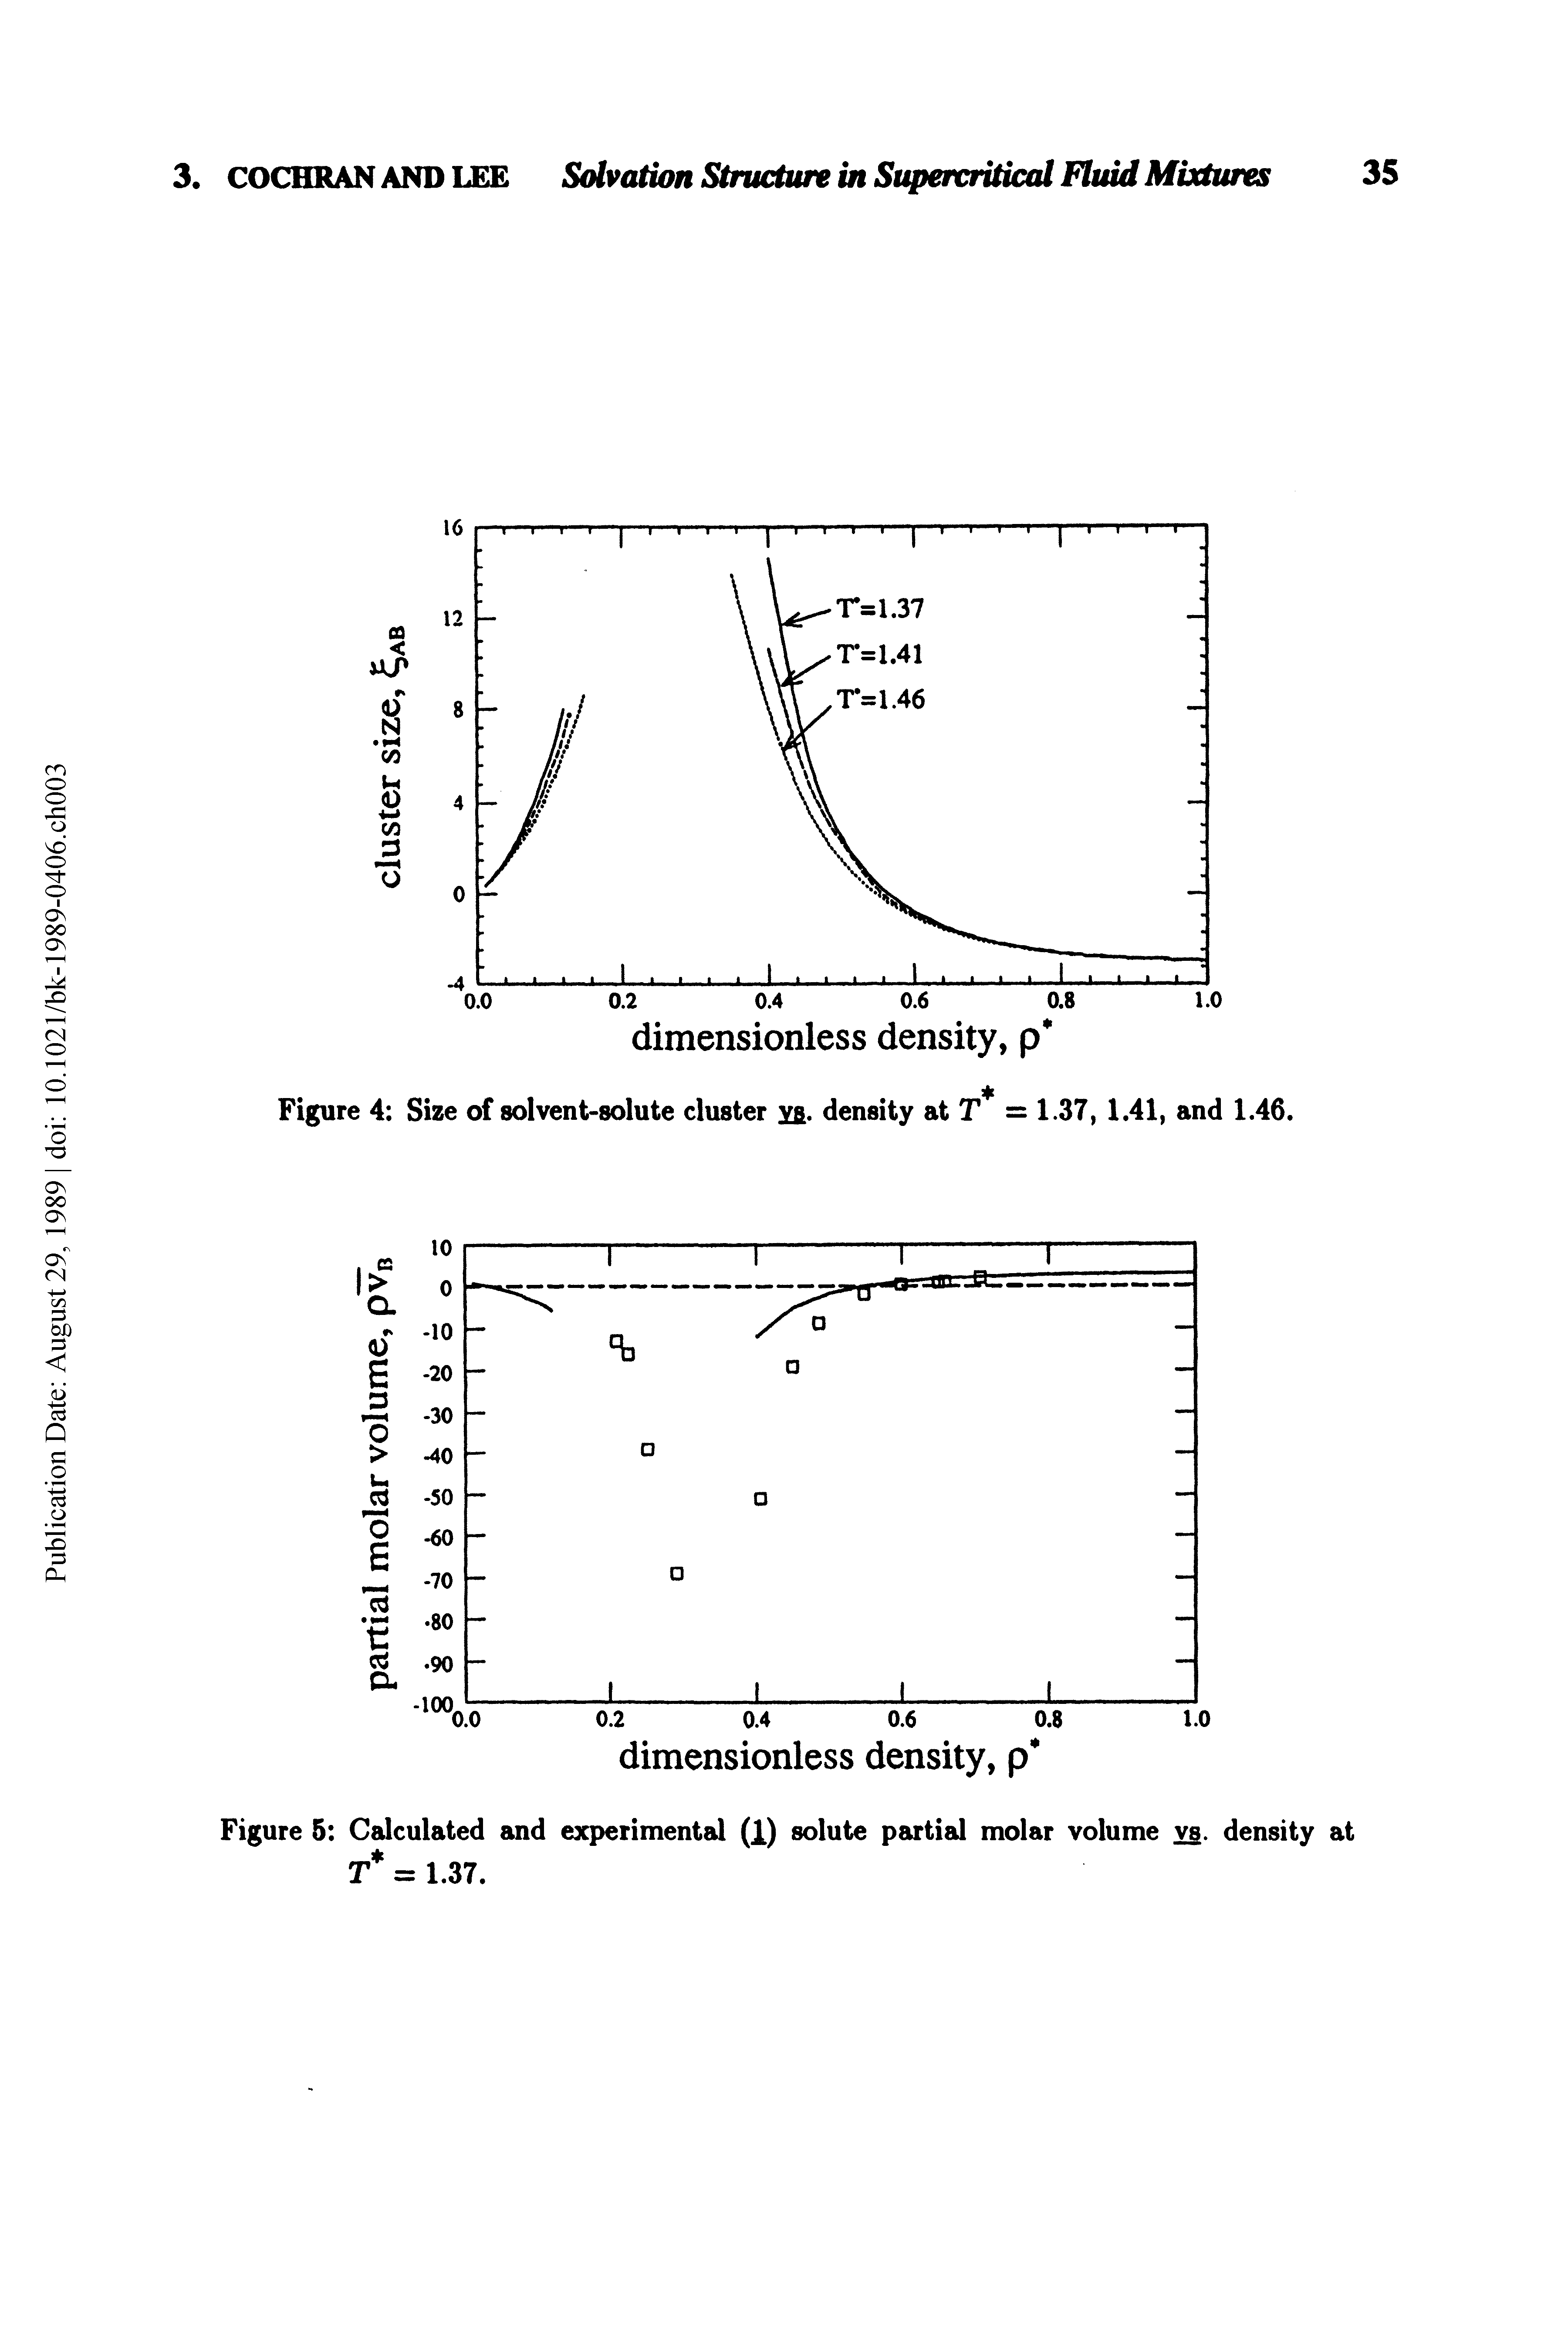 Figure 5 Calculated and experimental (1) solute partial molar volume ys. density at T = 1.37.